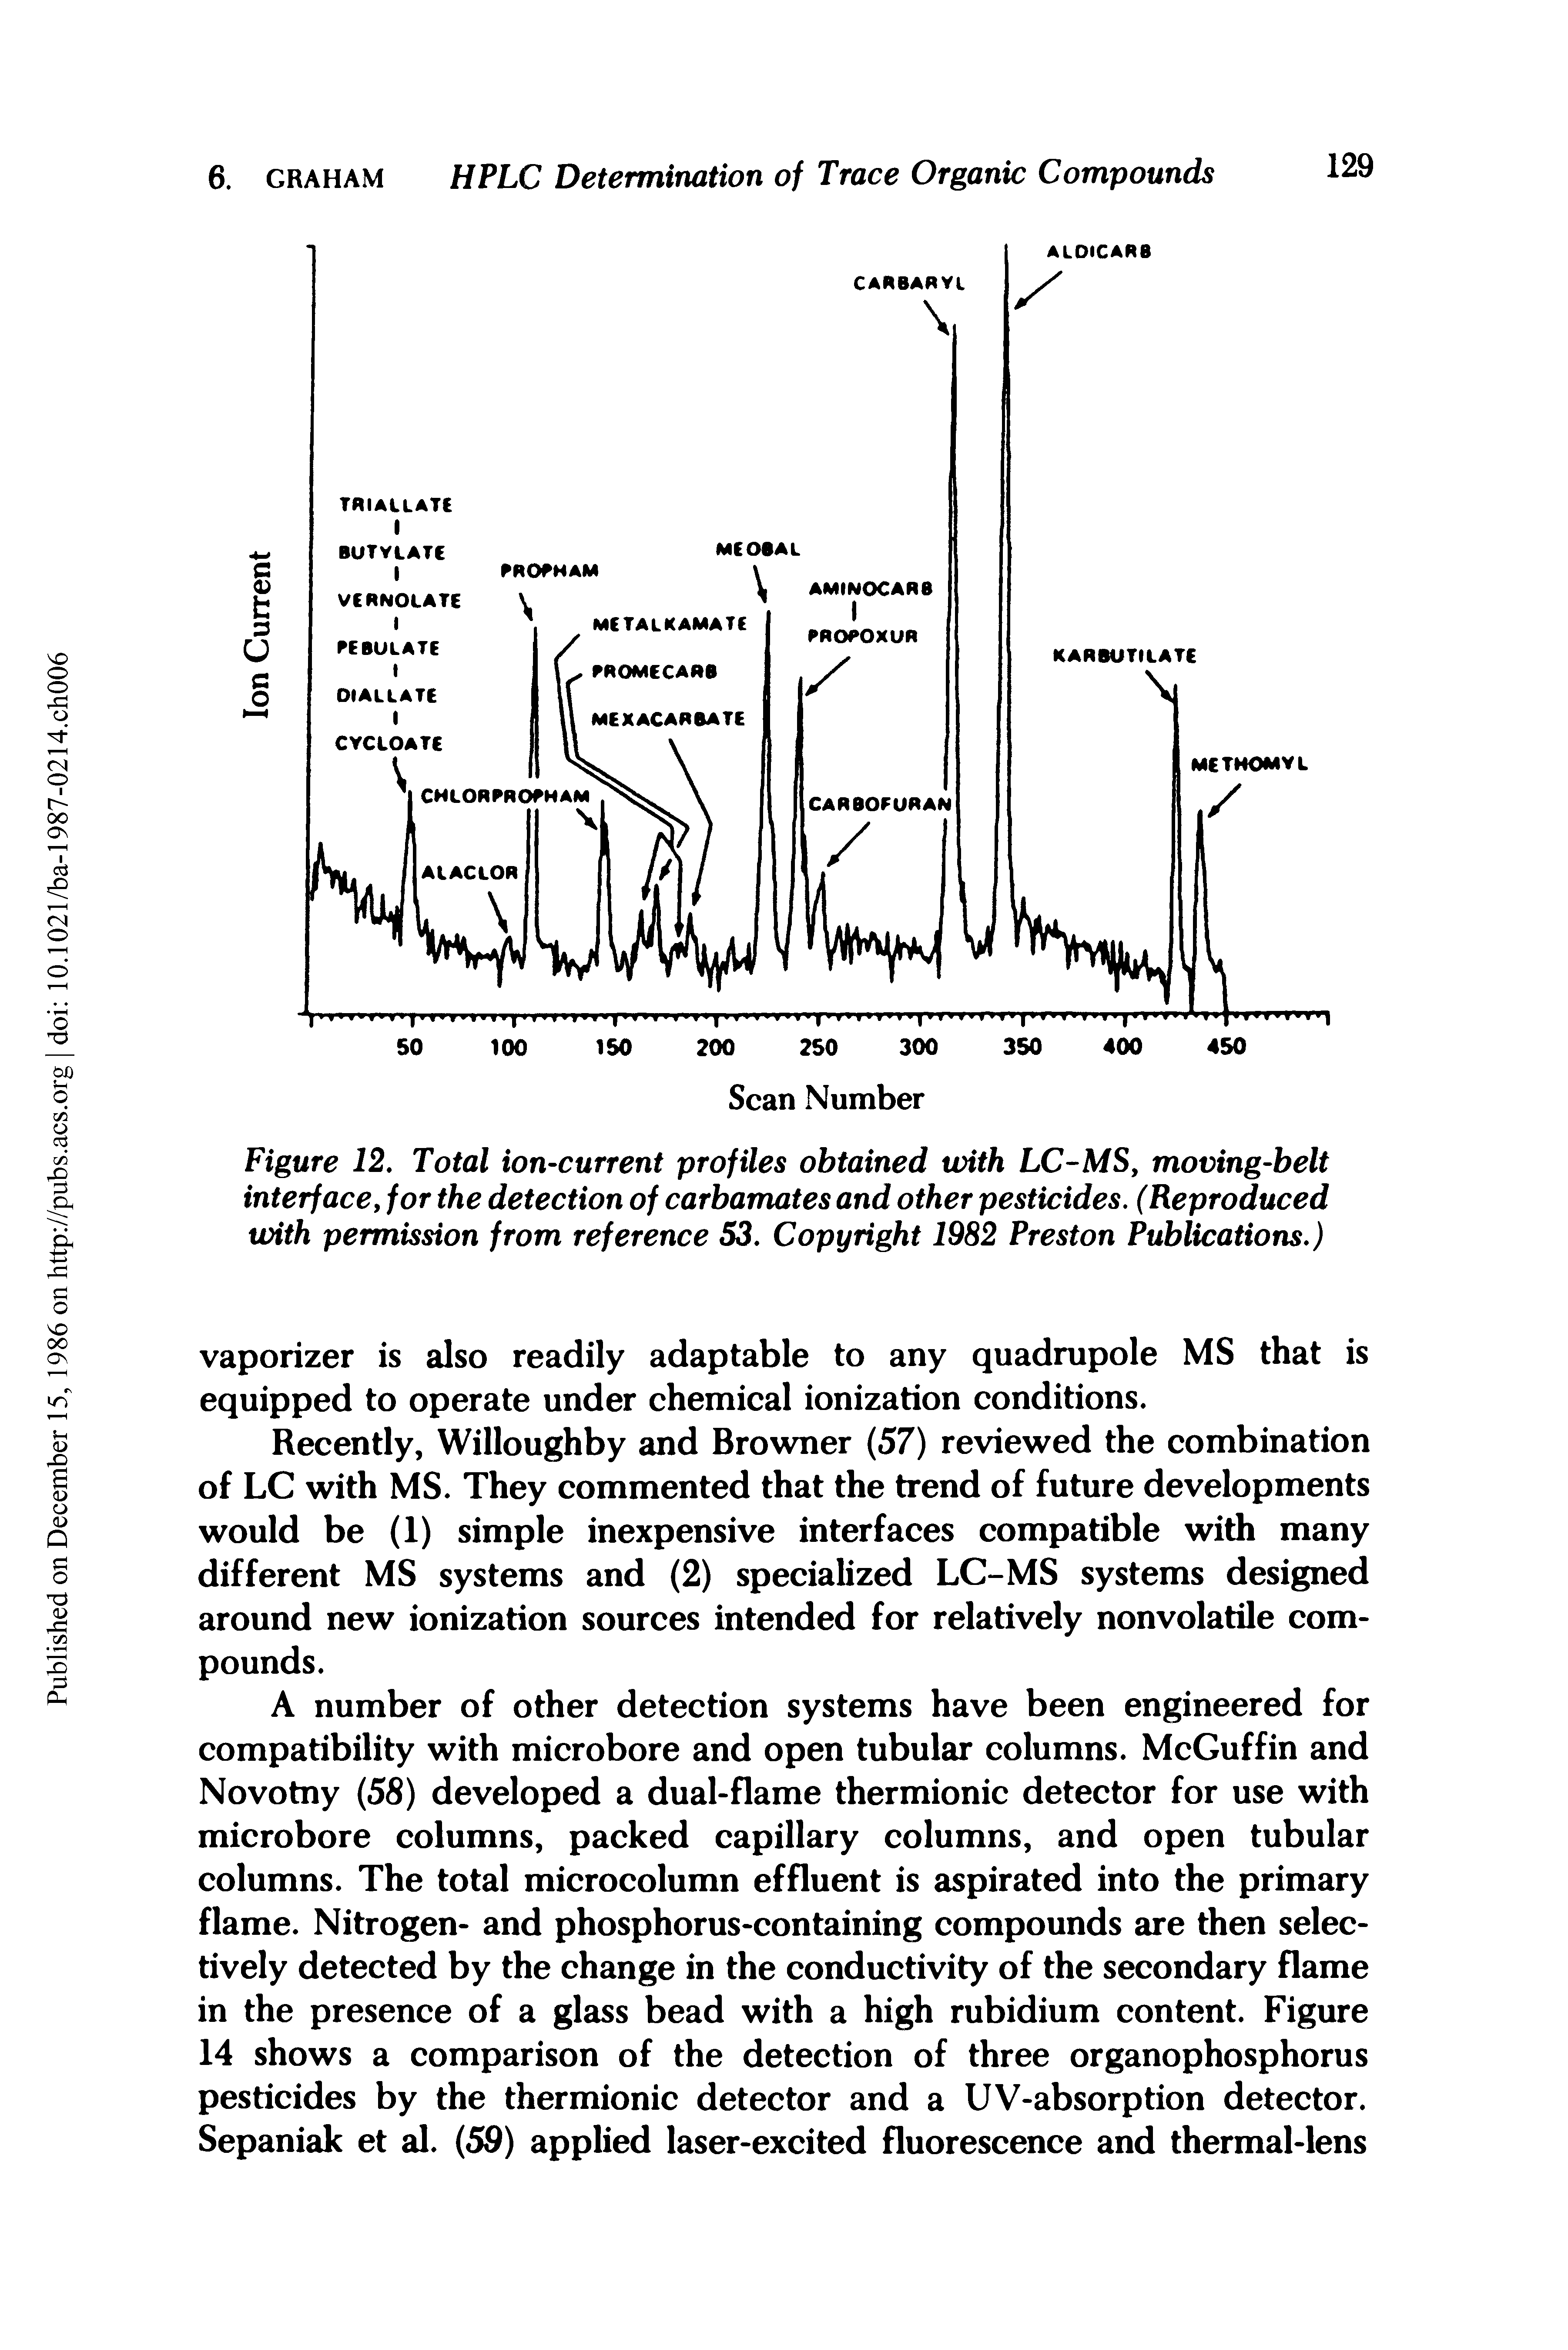 Figure 12. Total ion-current profiles obtained with LC-MS, moving-belt interface, for the detection of carbamates and other pesticides. (Reproduced with permission from reference 53. Copyright 1982 Preston Publications.)...